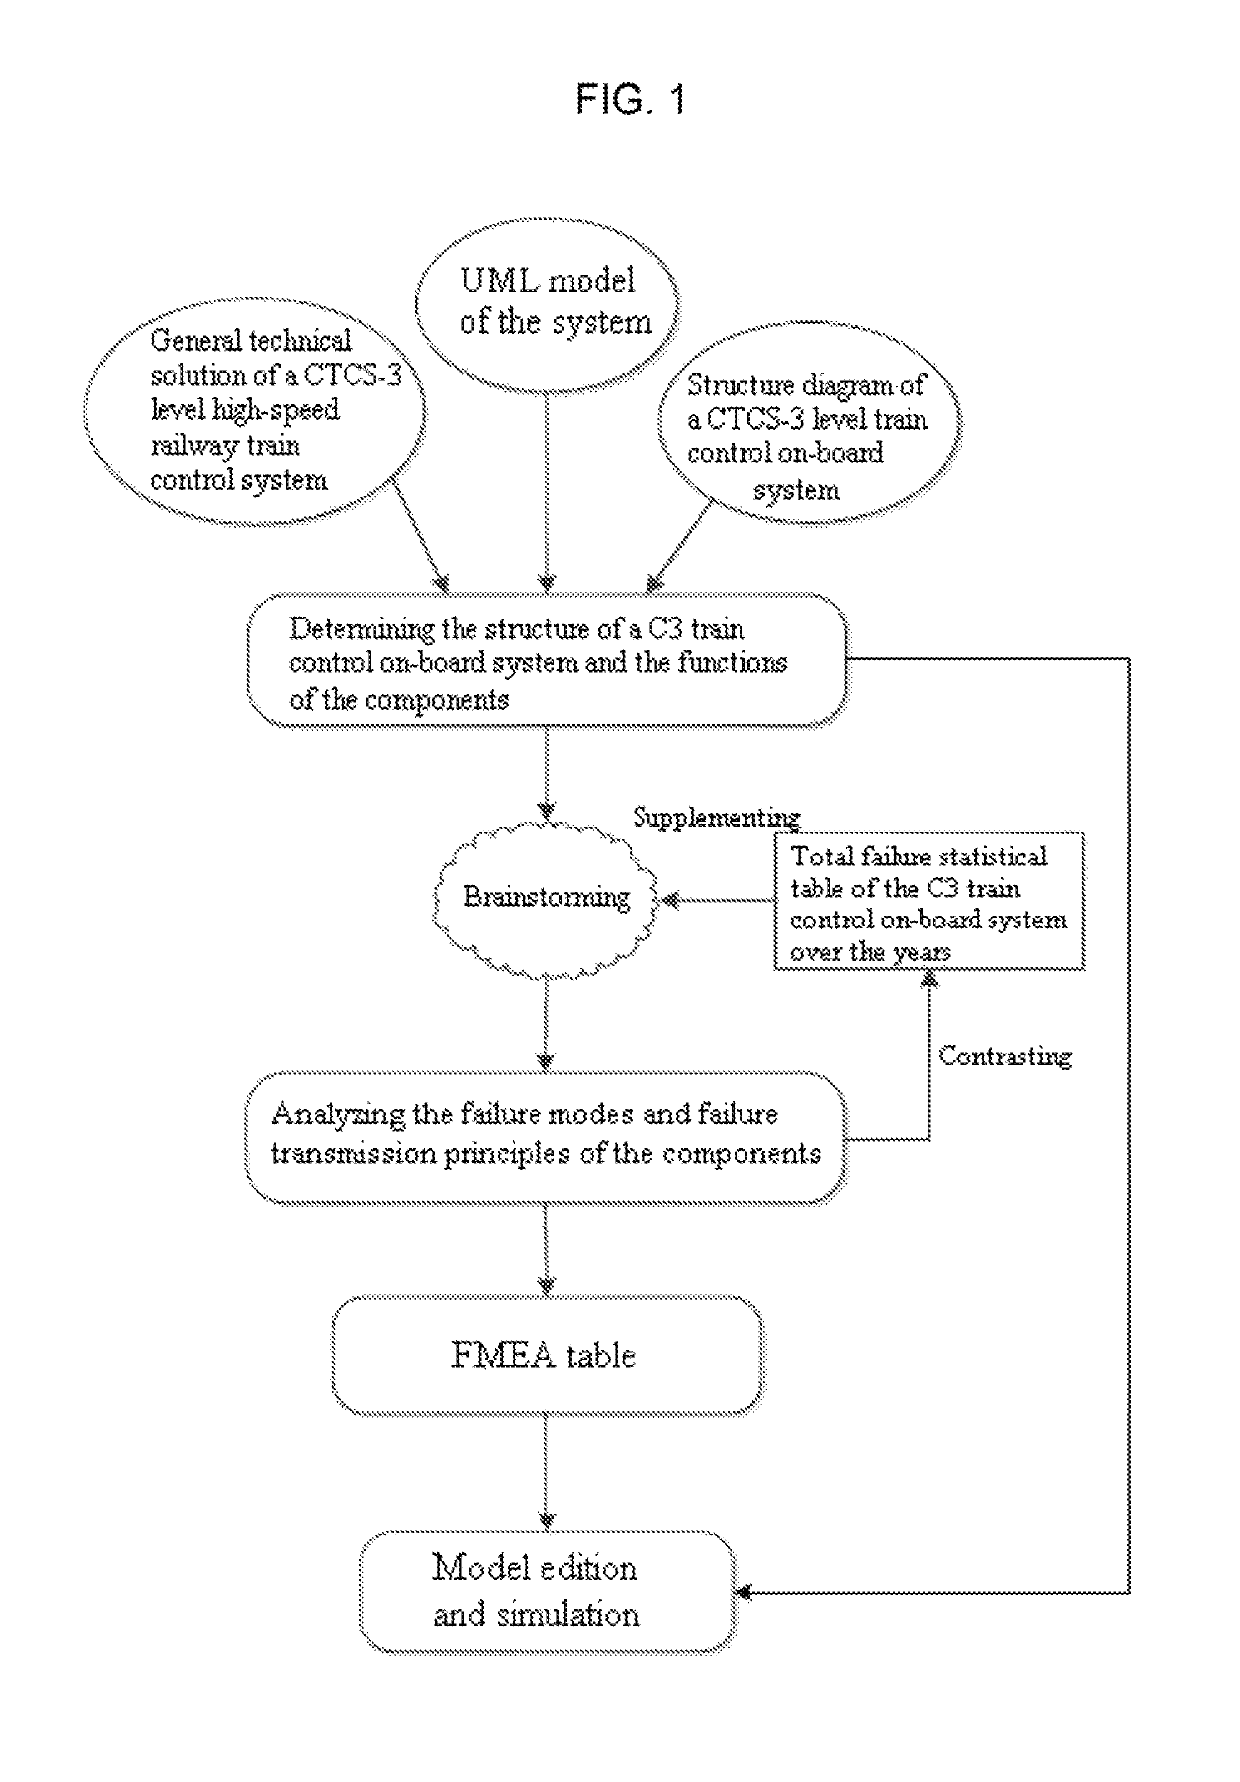 Failure logic modeling method for a high-speed railway train operation control on-board system